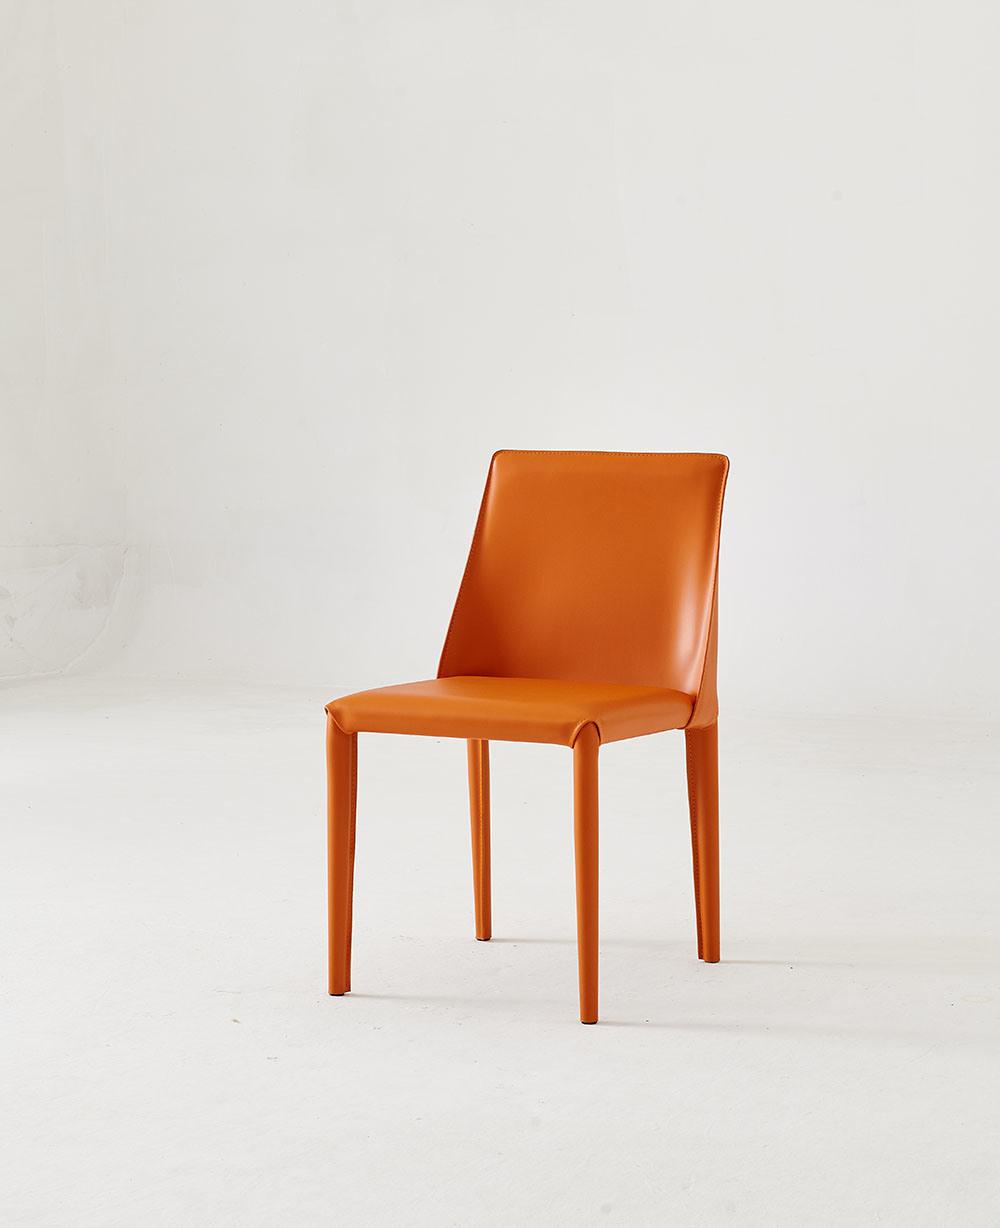 Home Furnture Office Furniture Orange Dining Chair